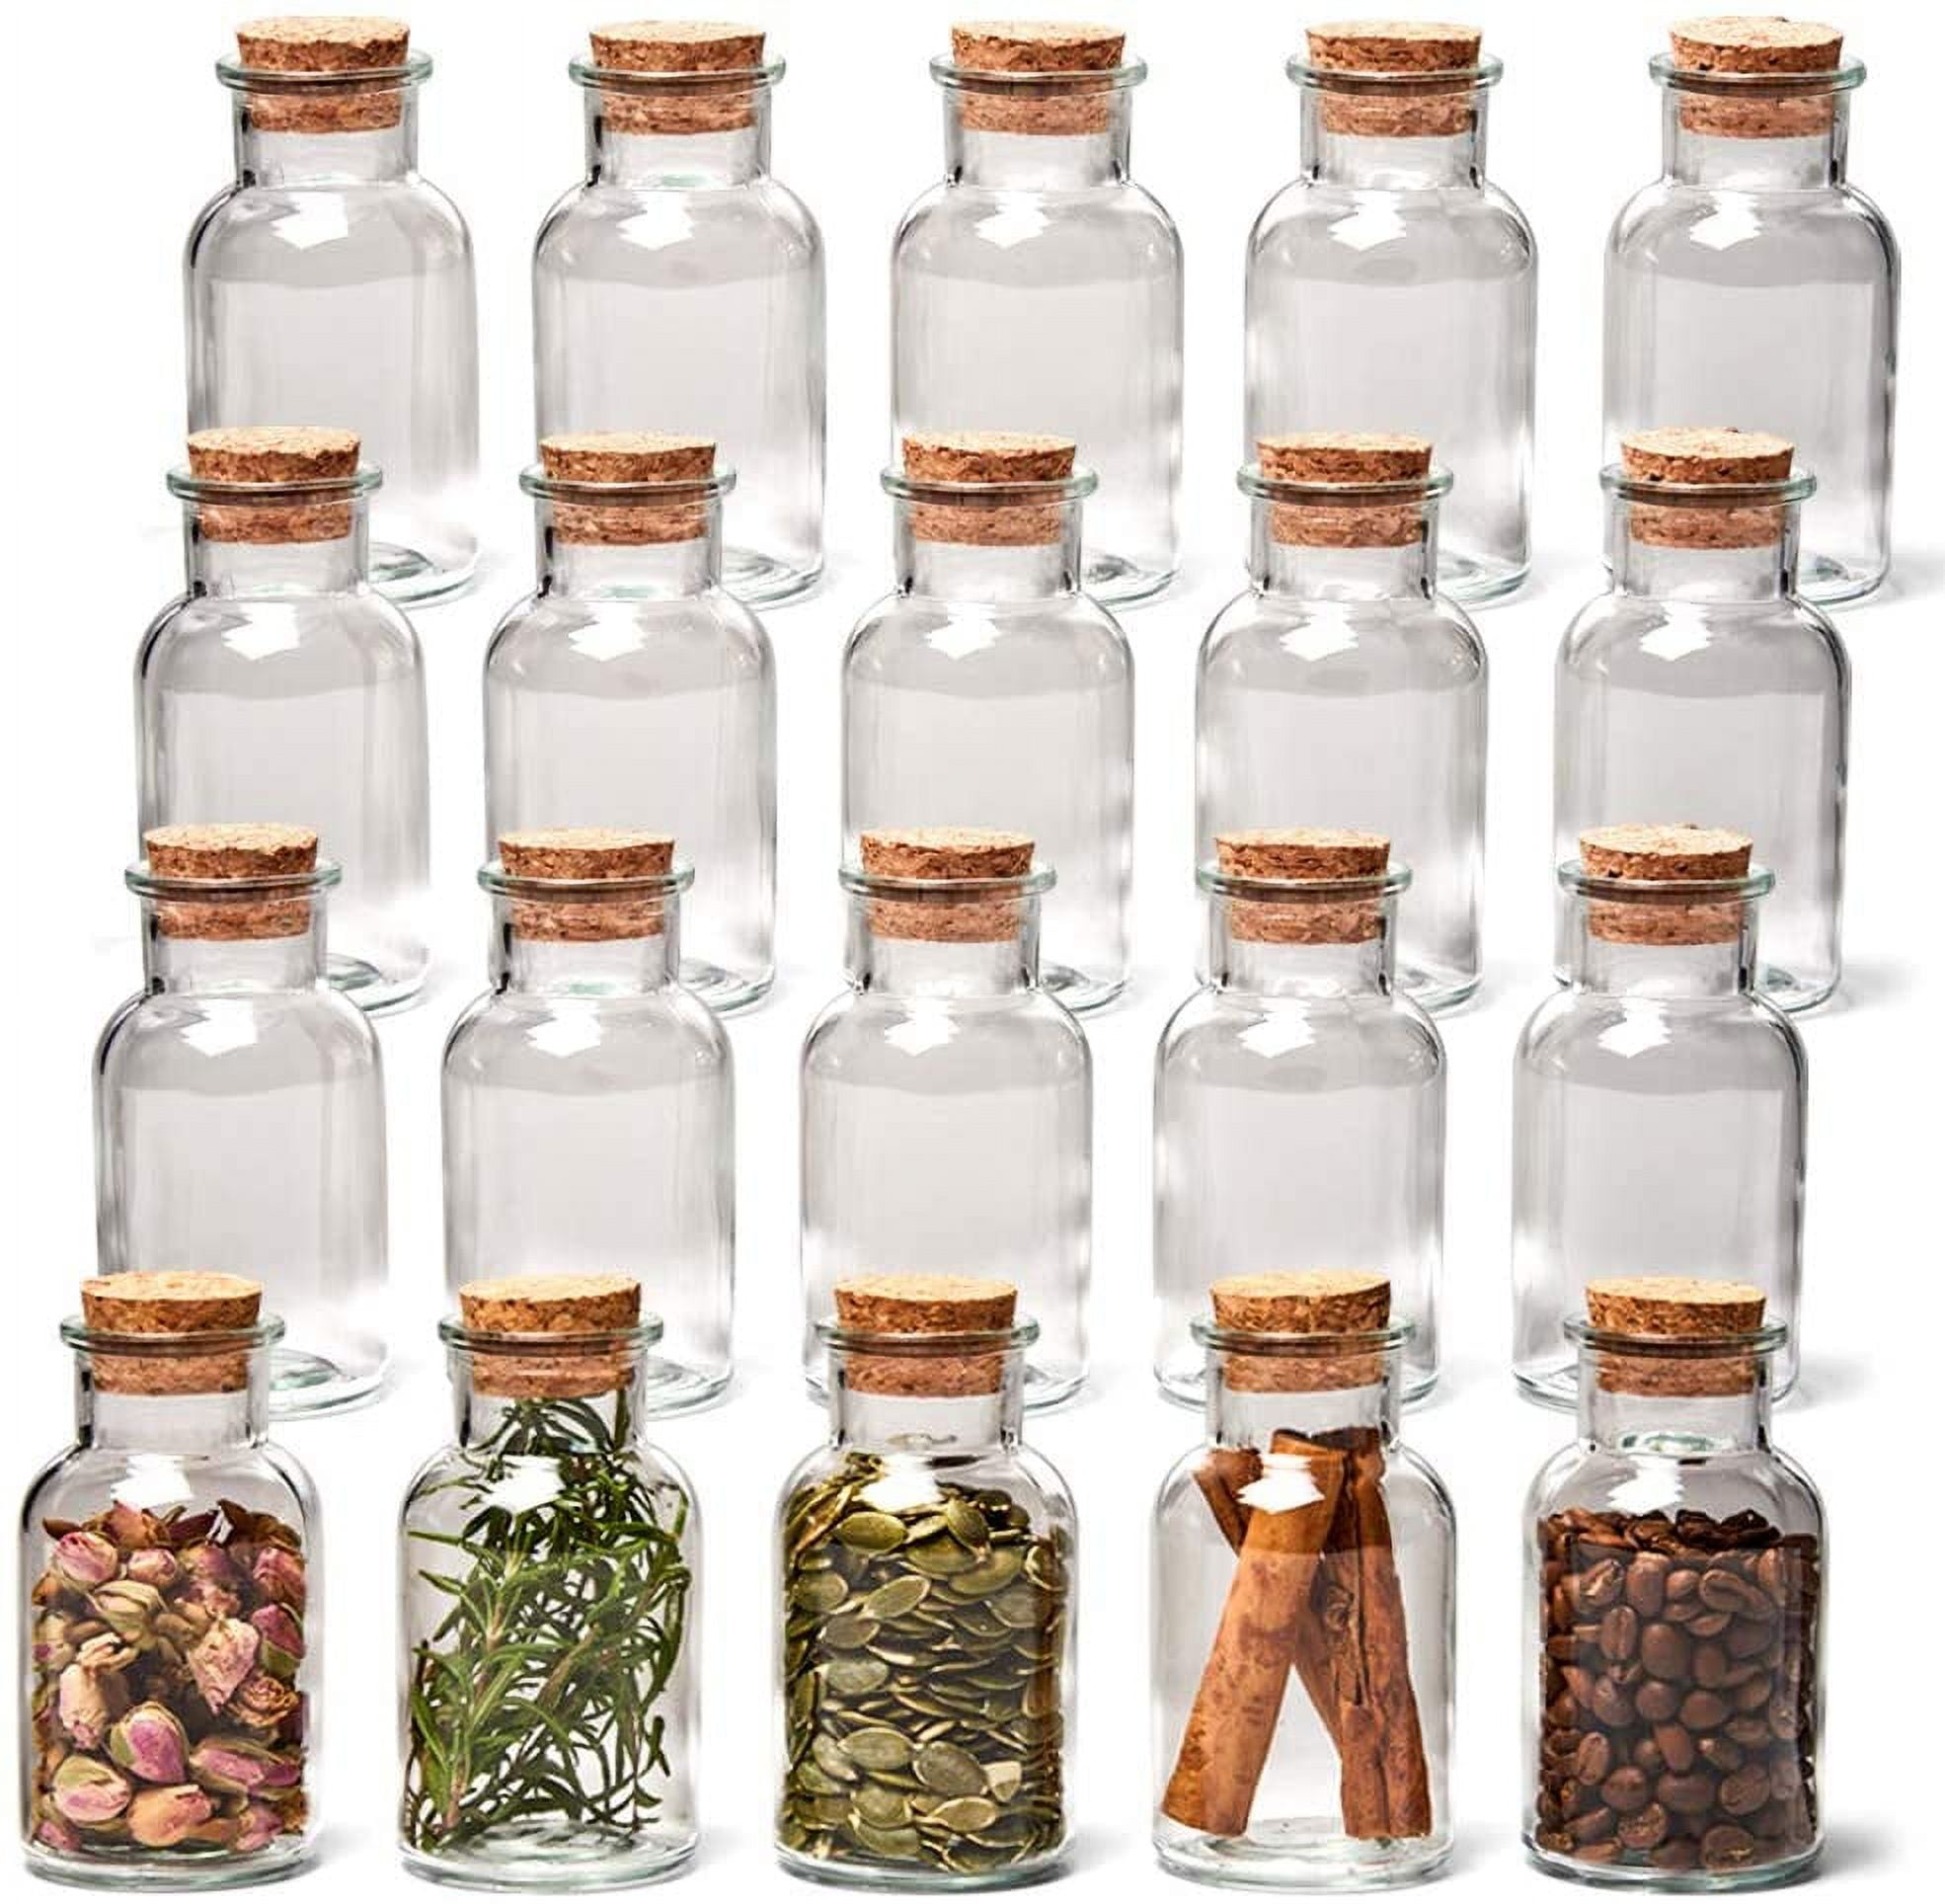 EZOWare 20 Spice Jars, 5oz Bottles Clear Glass Canister Container